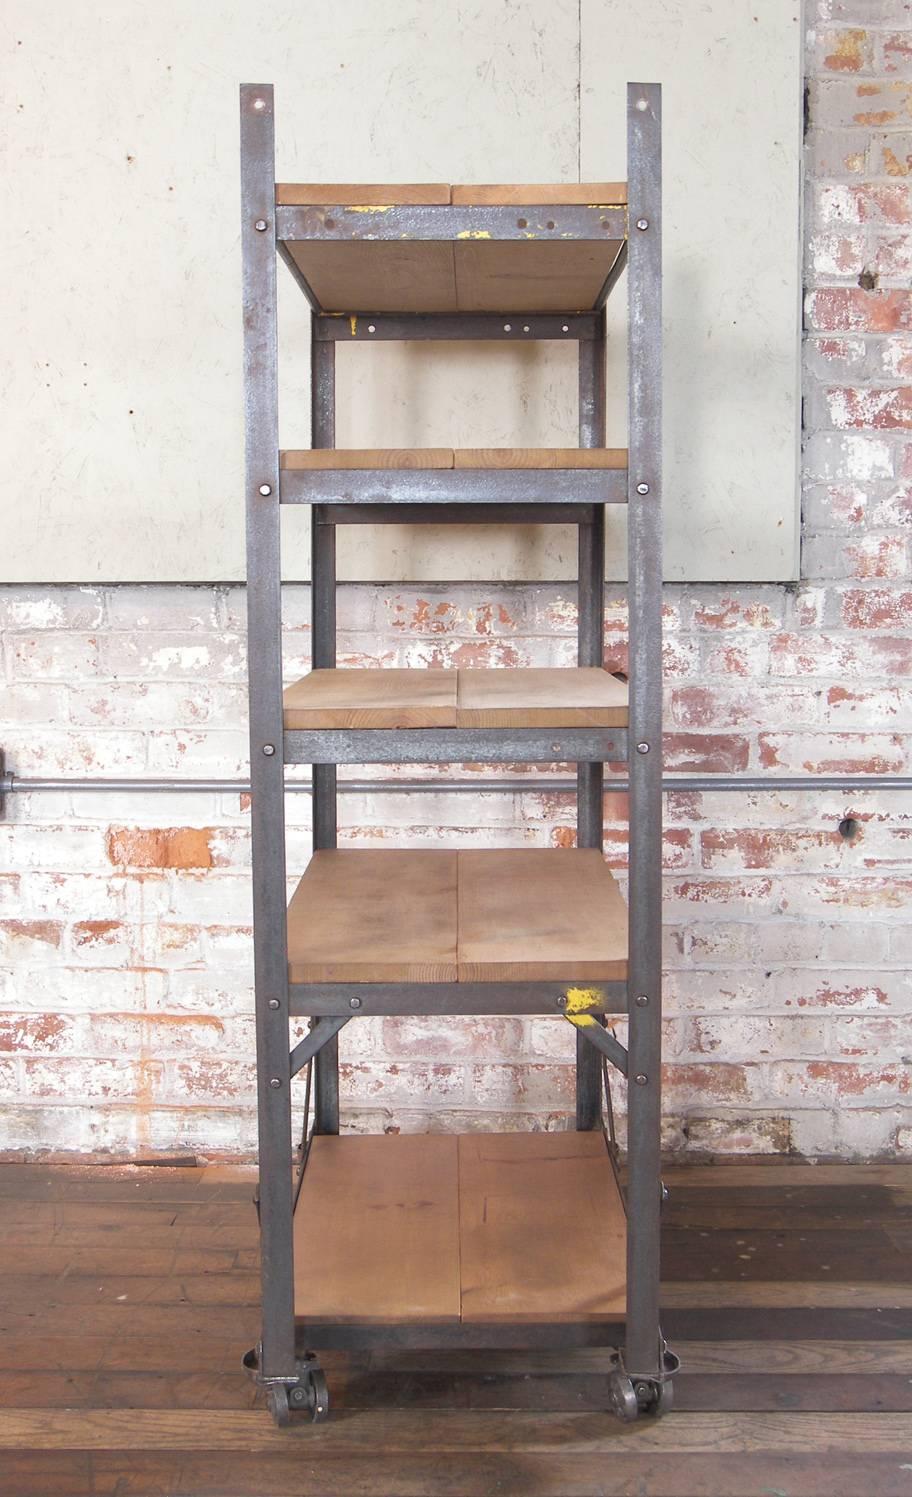 Vintage Industrial five-tier wood and metal shelving rolling bar cart / storage unit. Overall dimensions are 29 1/4″ x 16 3/4″ x 51 1/2″. Top depth is 15 1/4″. Bottom depth is 16 3/4″. Shelves measure 28 3/4″ x 13 3/4″. Shelf heights are 5″, 19